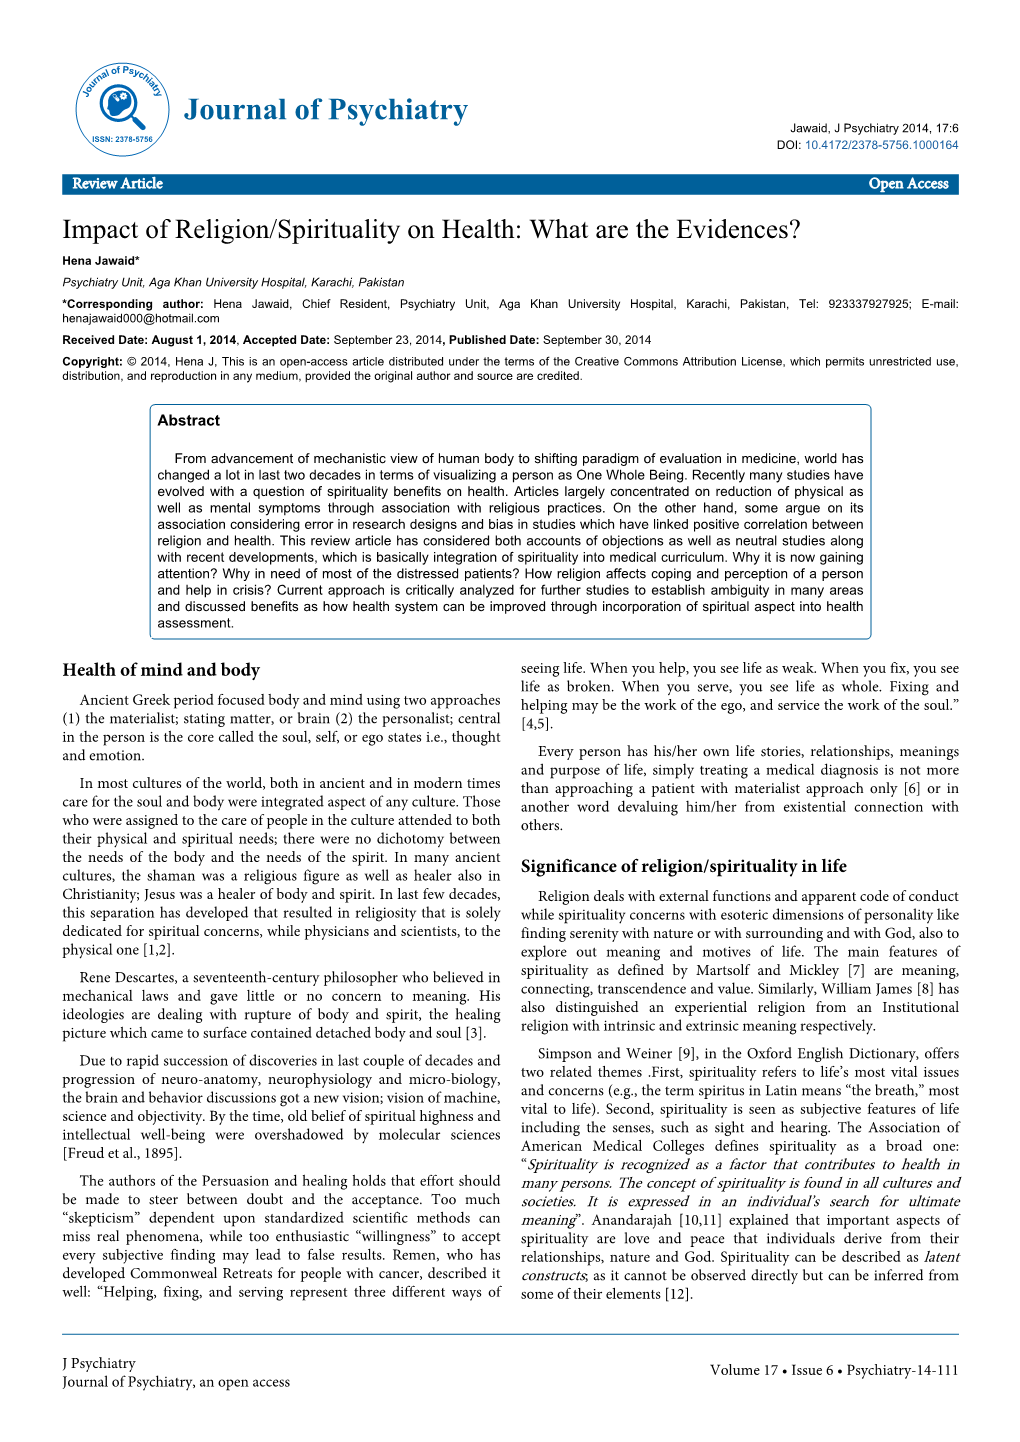 Impact of Religion/Spirituality on Health: What Are the Evidences?